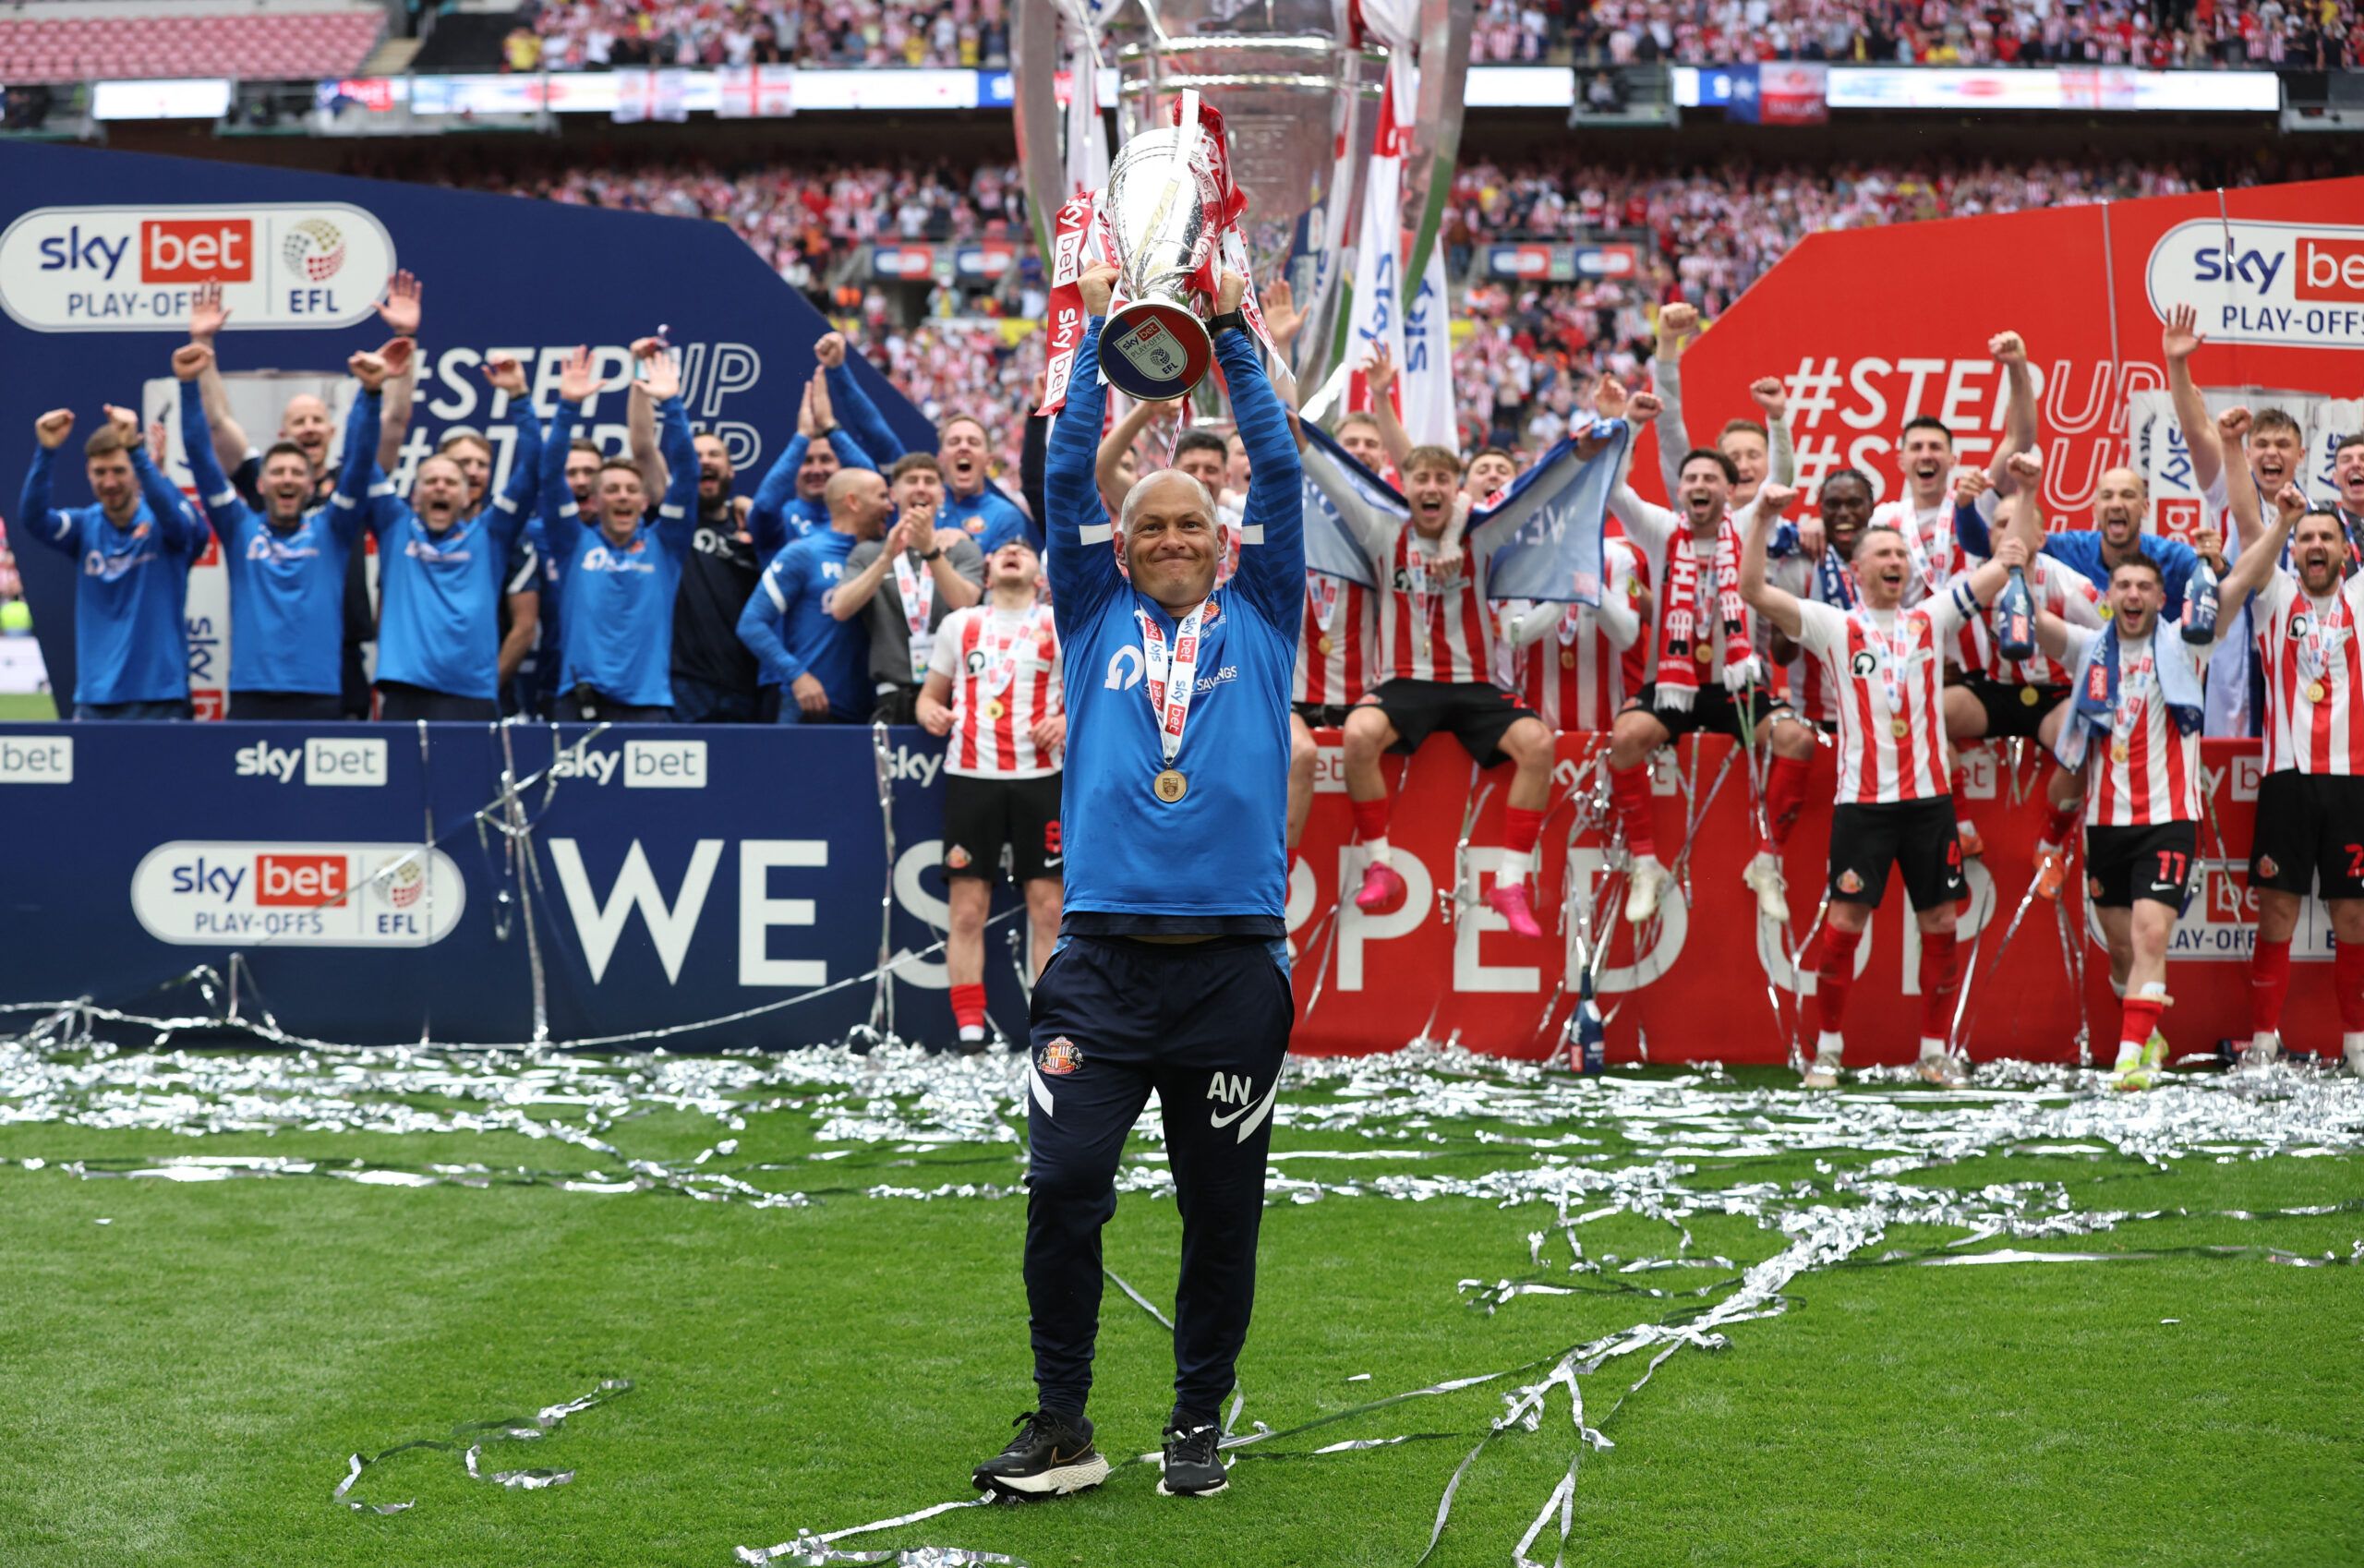 Soccer Football - League One Play-Off Final - Sunderland v Wycombe Wanderers - Wembley Stadium, London, Britain - May 21, 2022  Sunderland manager Alex Neil celebrates with the trophy after winning the League One Play-Off Action Images/Matthew Childs EDITORIAL USE ONLY. No use with unauthorized audio, video, data, fixture lists, club/league logos or 'live' services. Online in-match use limited to 75 images, no video emulation. No use in betting, games or single club /league/player publications. 